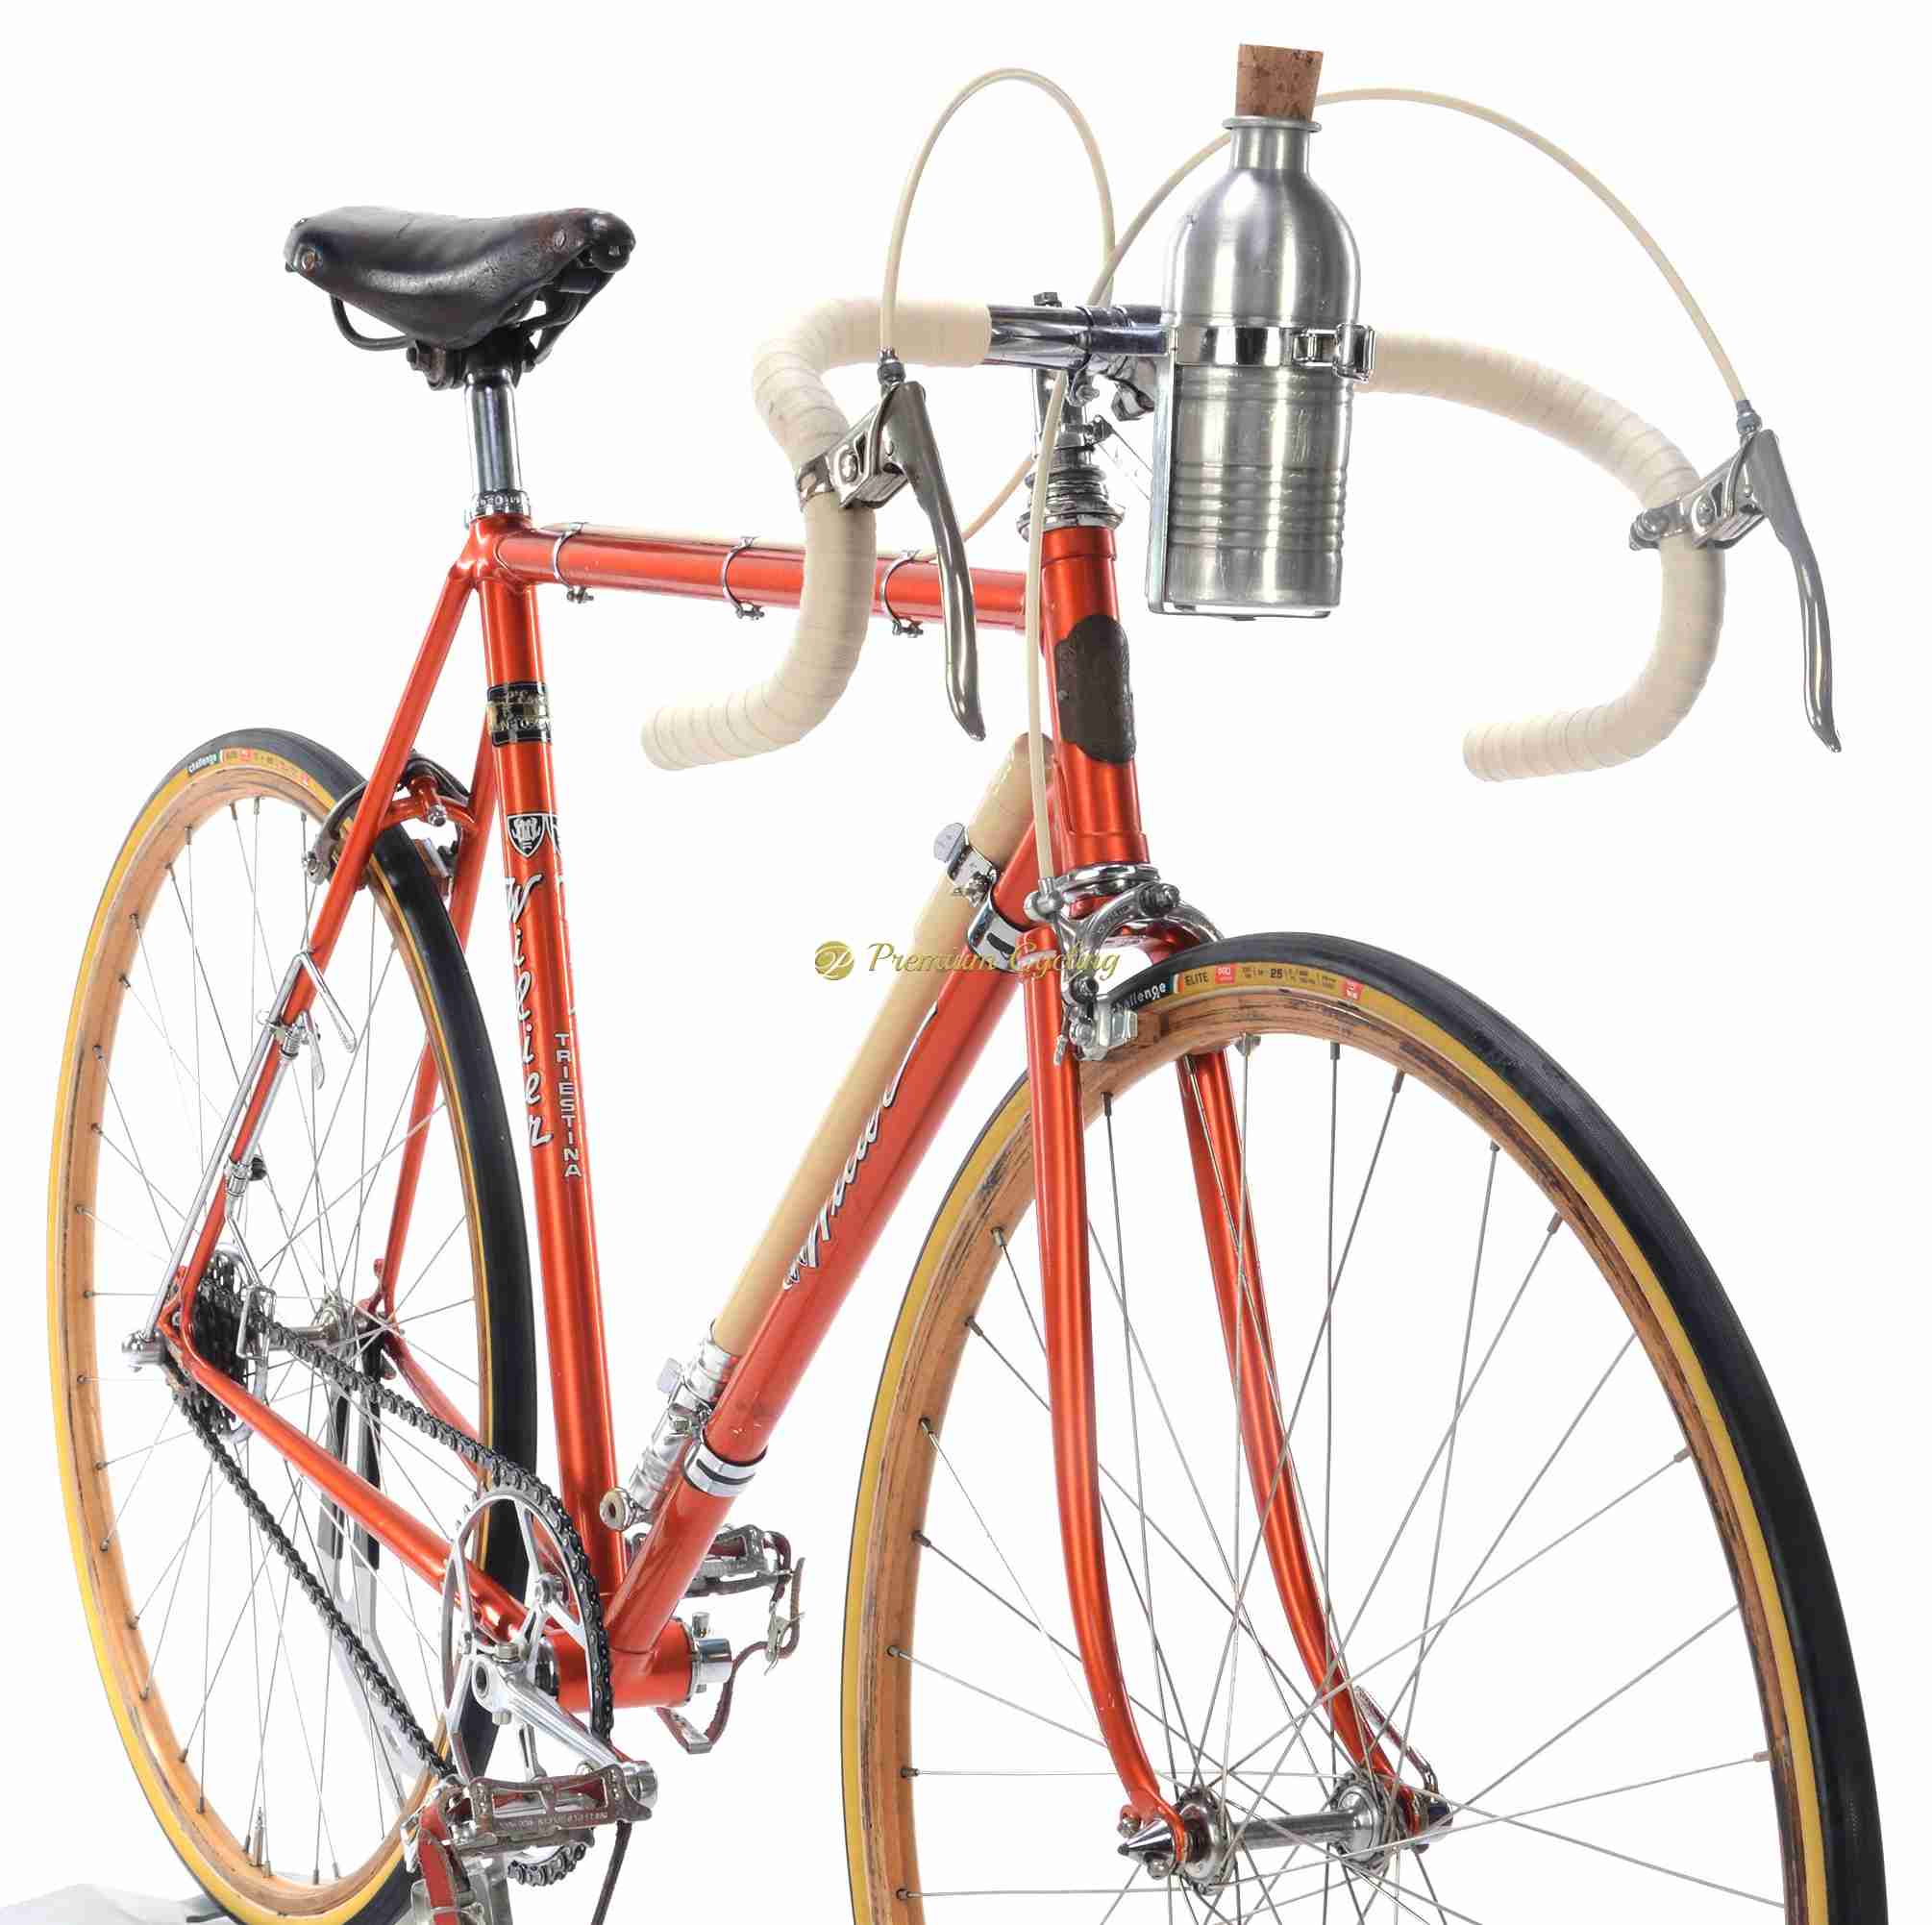 Verwachting Ontspannend Schuldig WILIER Triestina Campagnolo Cambio Corsa, 58cm (early 1940s) – SOLD –  Premium Cycling – Website for steel and collectible vintage bikes, parts  and clothing